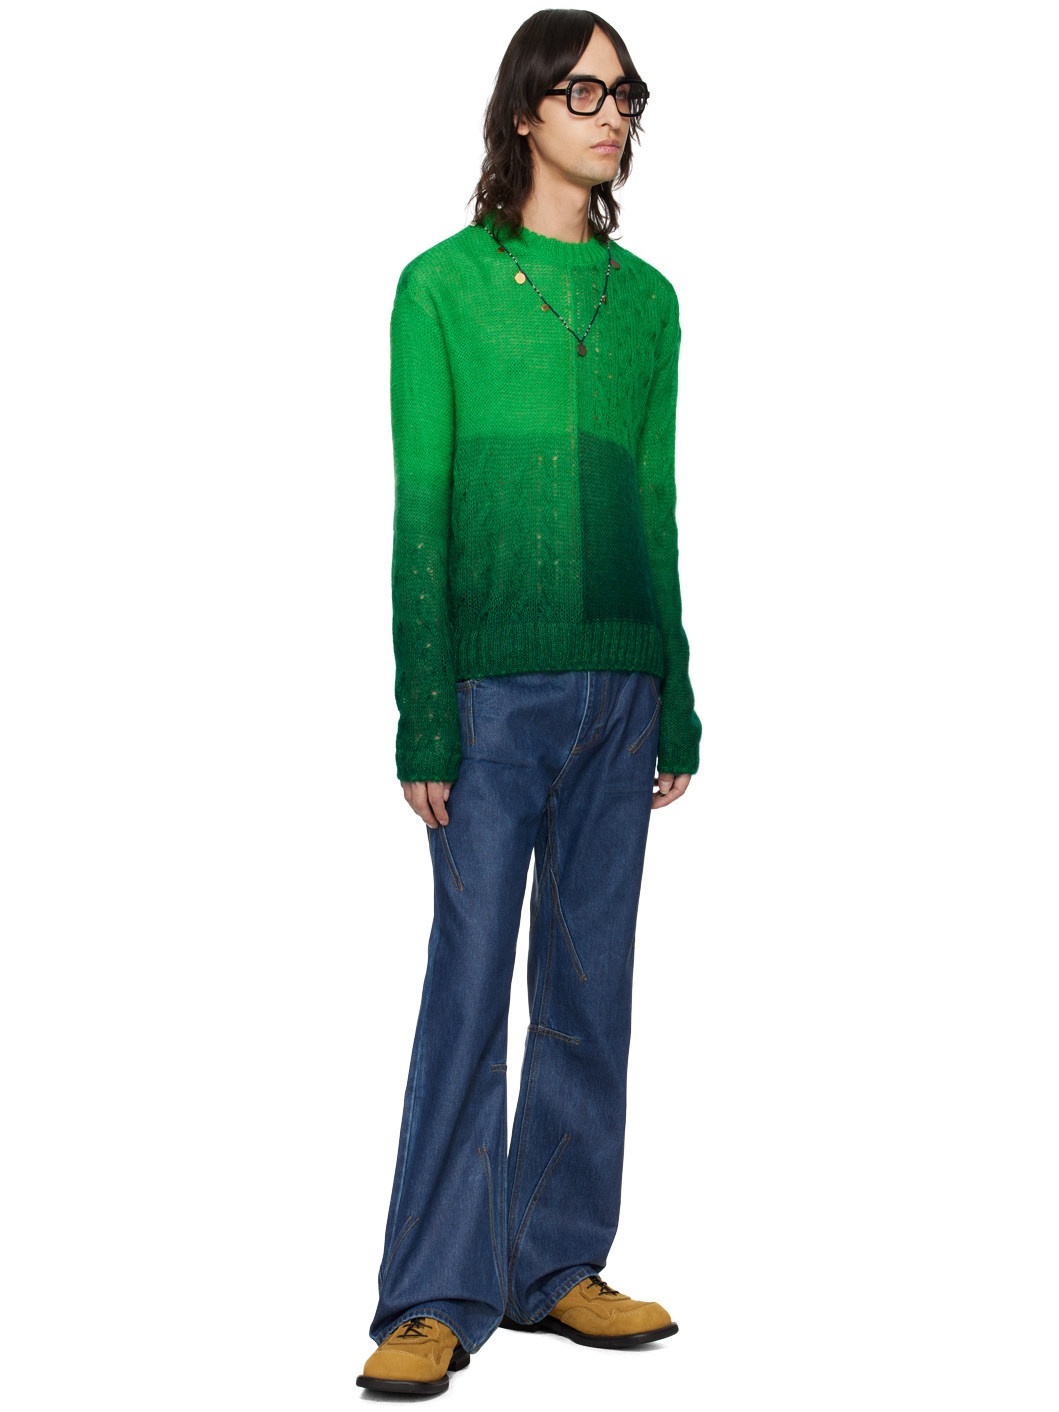 Green Foresk Sweater - 4